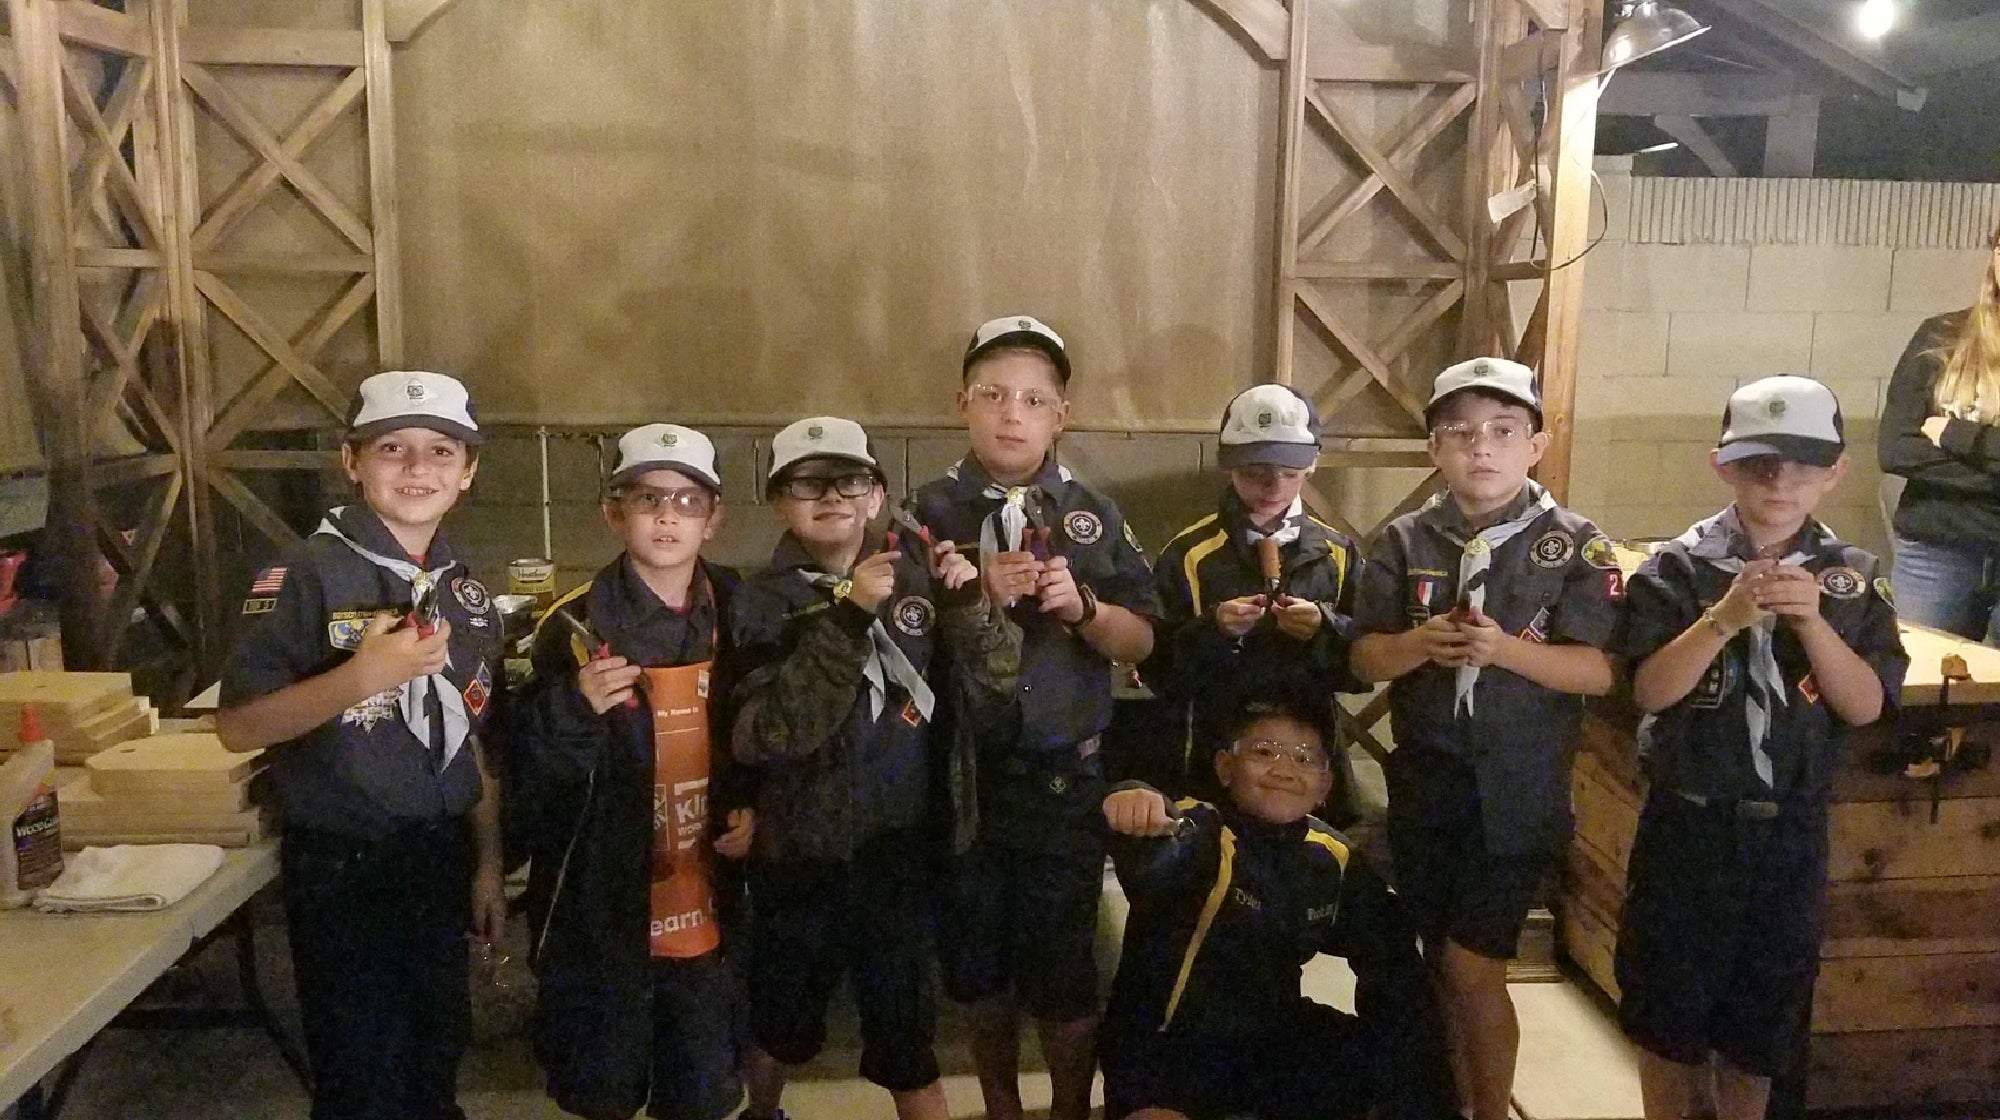 Building Skills With Cub Scouts